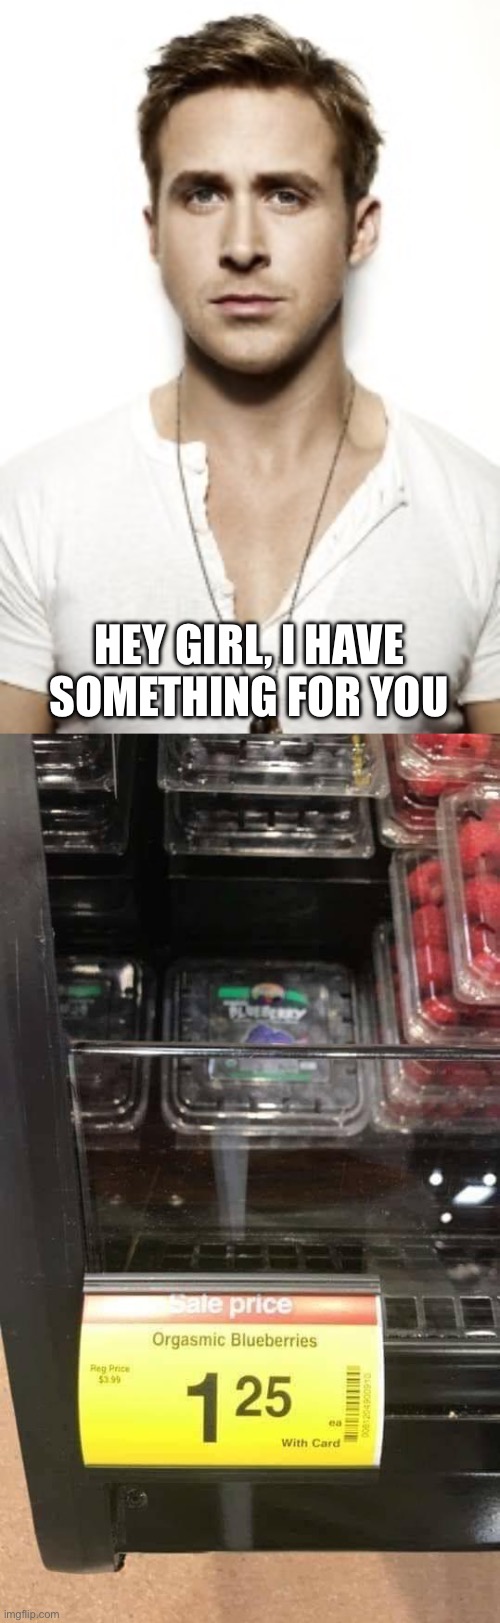 Let me give you some | HEY GIRL, I HAVE SOMETHING FOR YOU | image tagged in memes,ryan gosling,blueberry | made w/ Imgflip meme maker